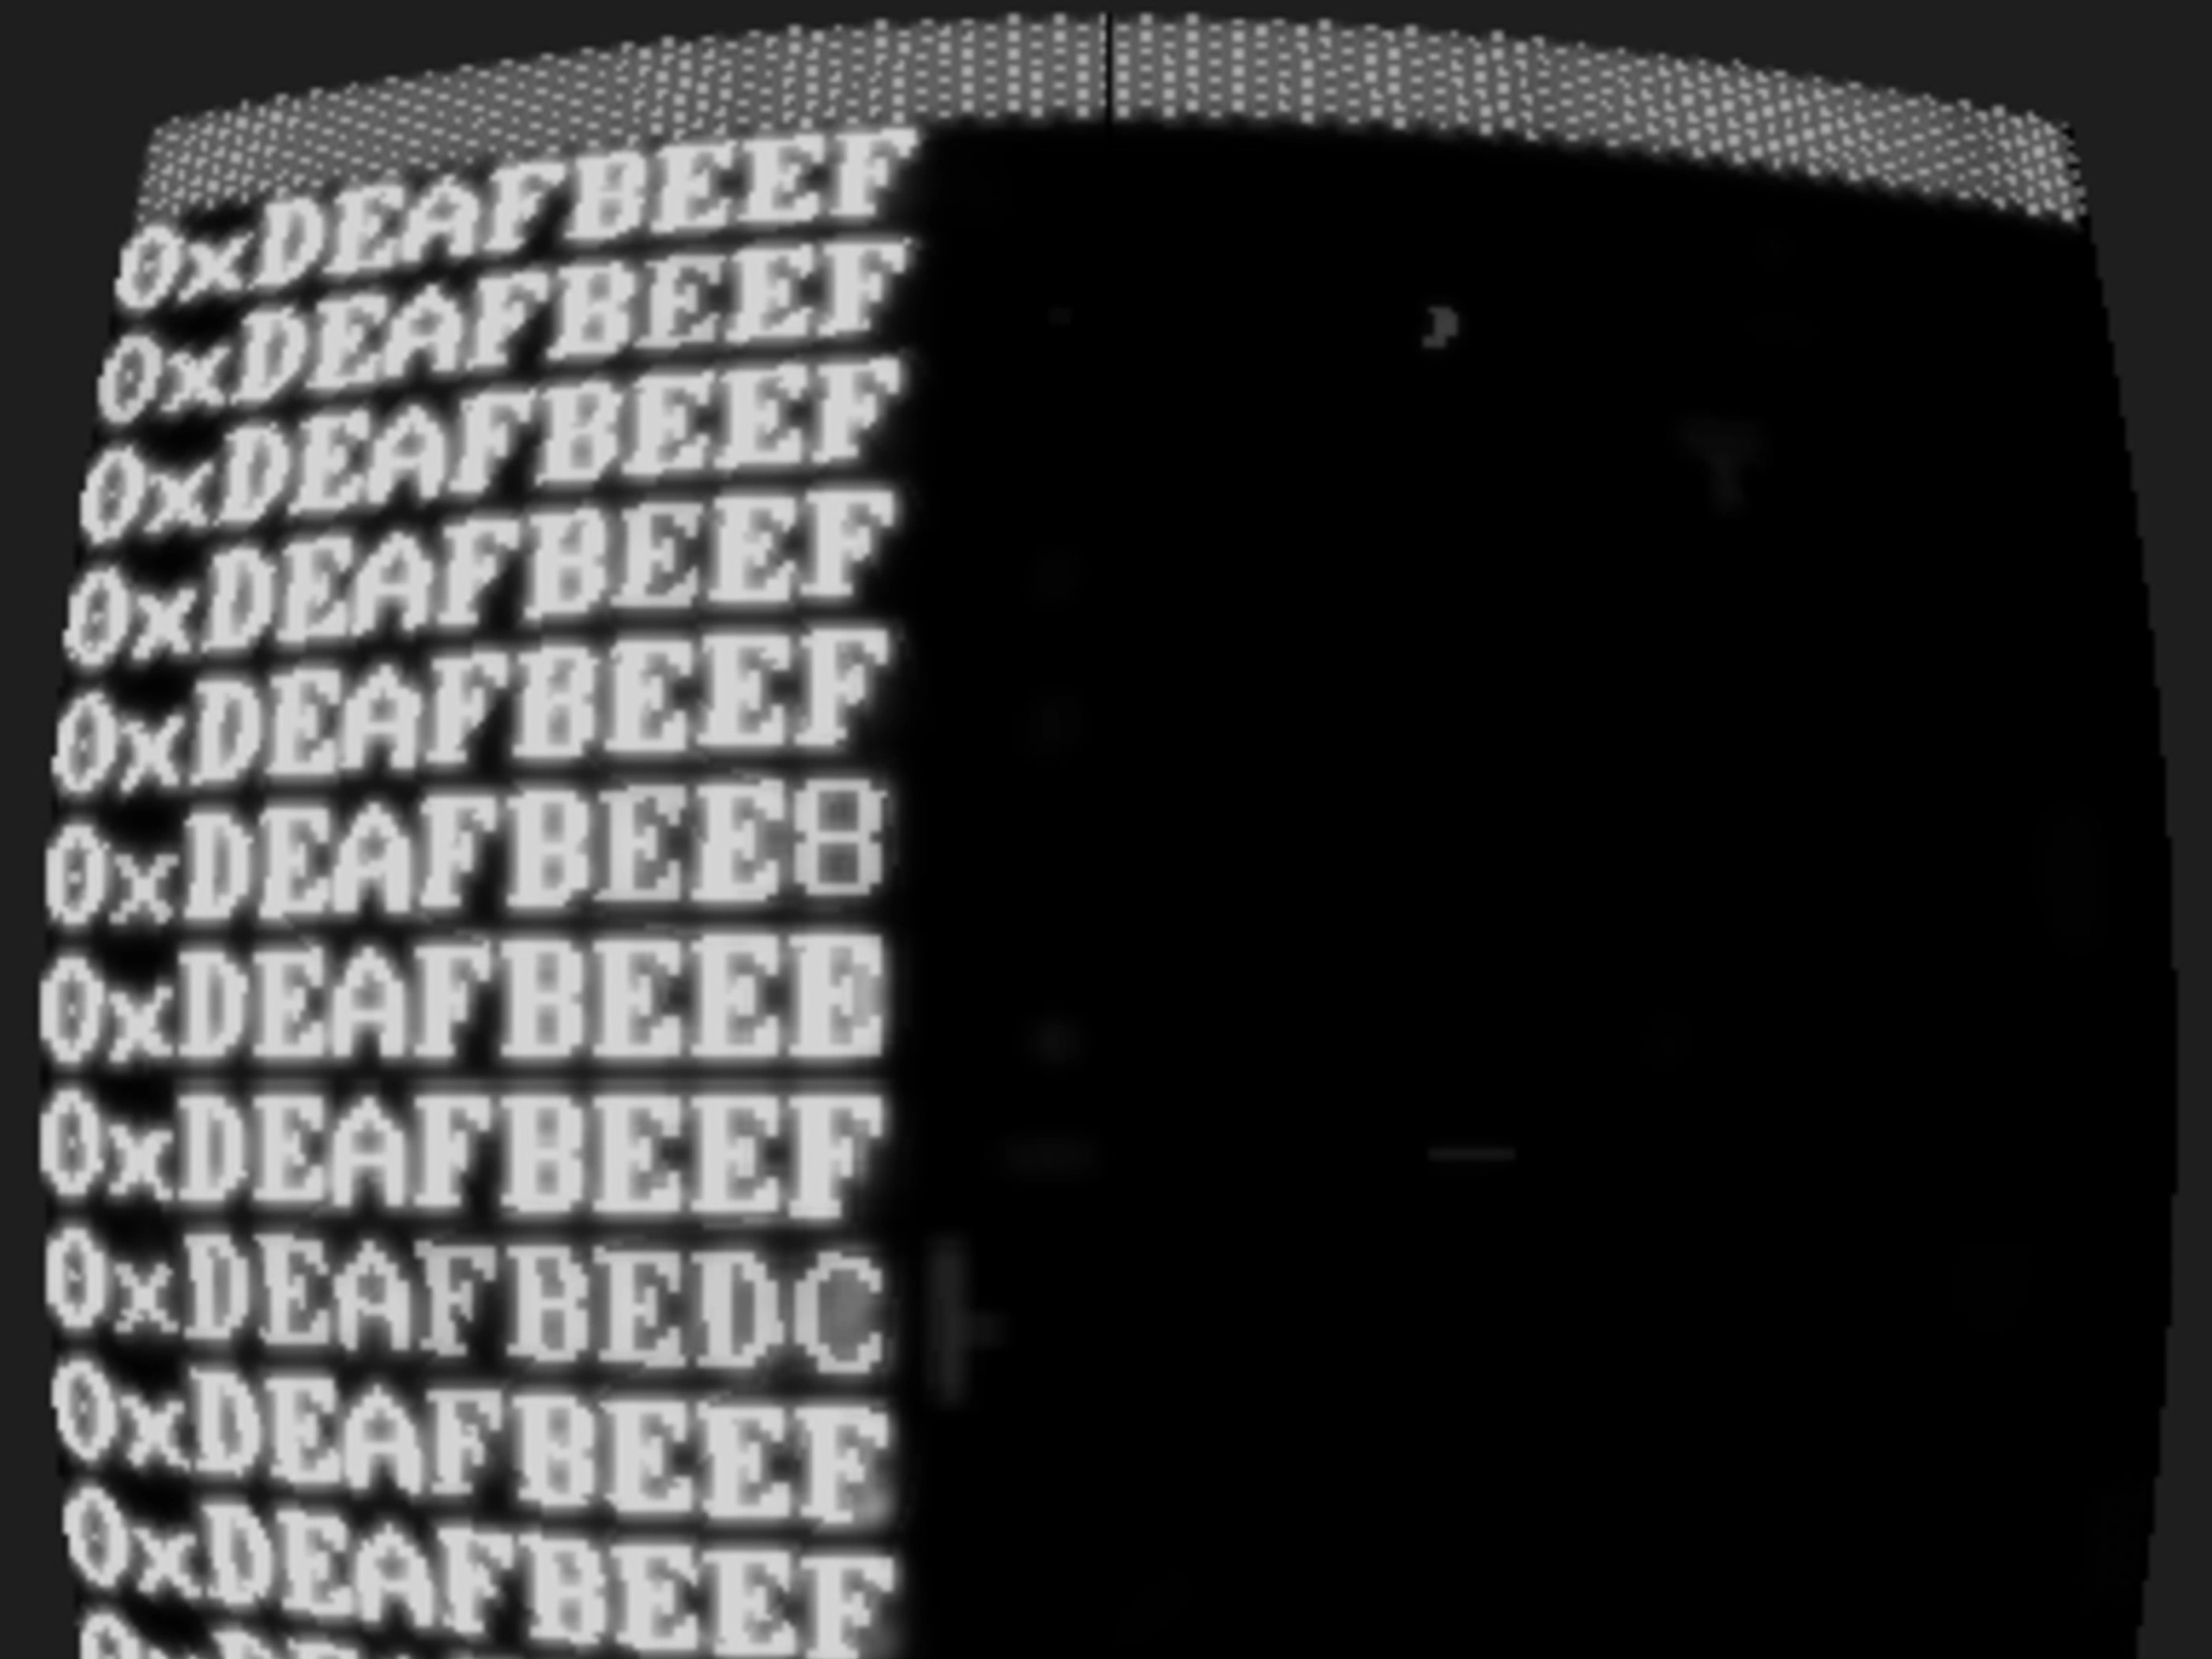 Deafbeef